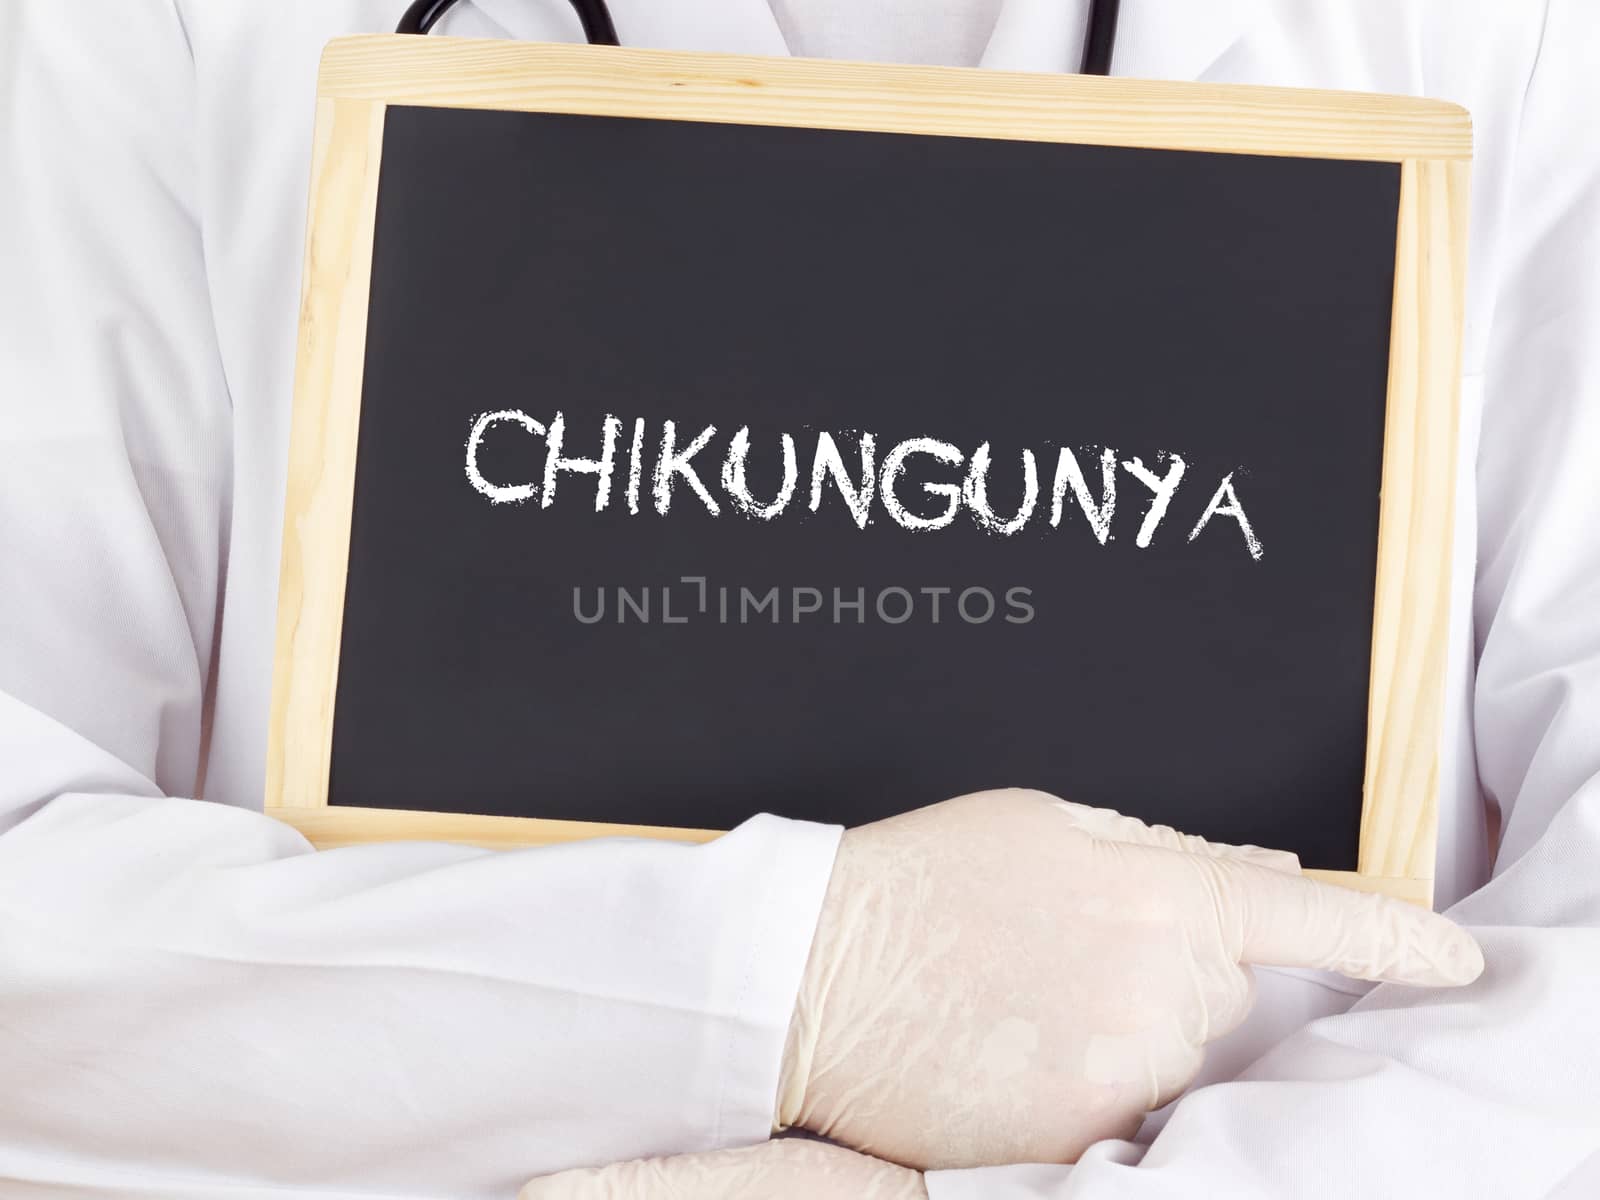 Doctor shows information on blackboard: Chikungunya by gwolters